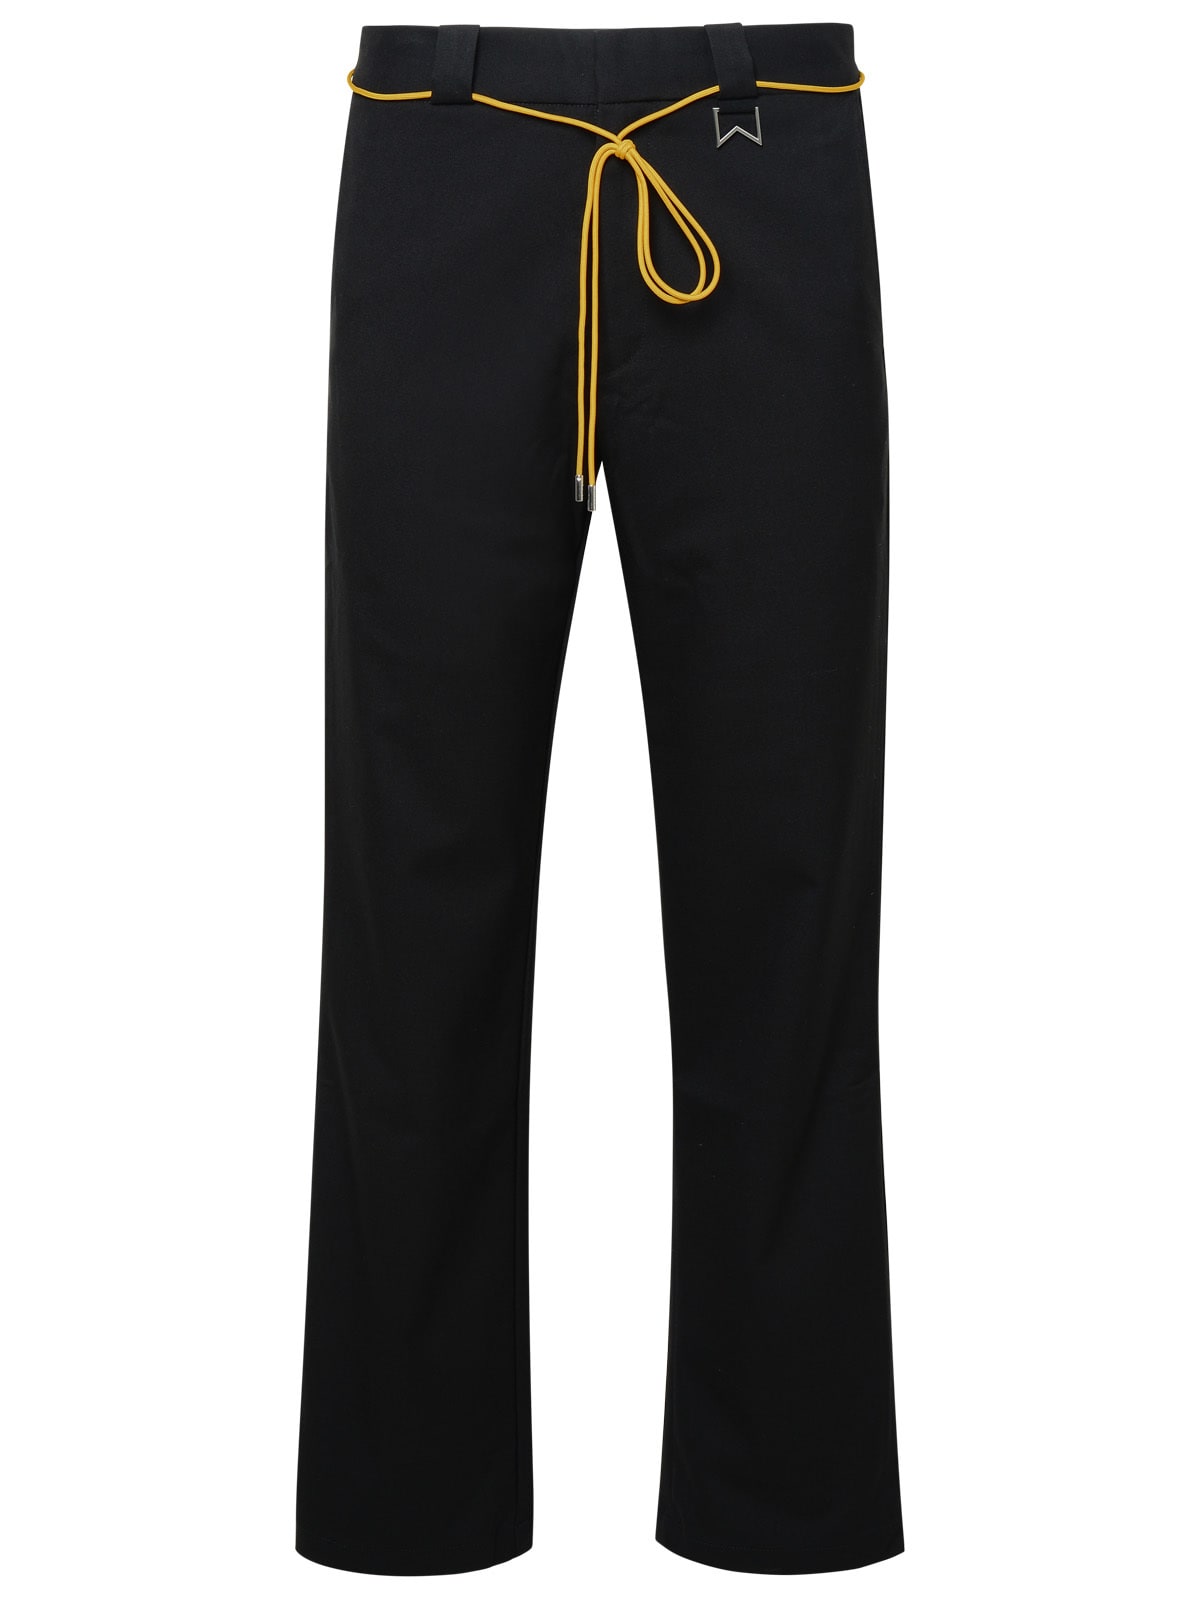 Black Polyester Joggers